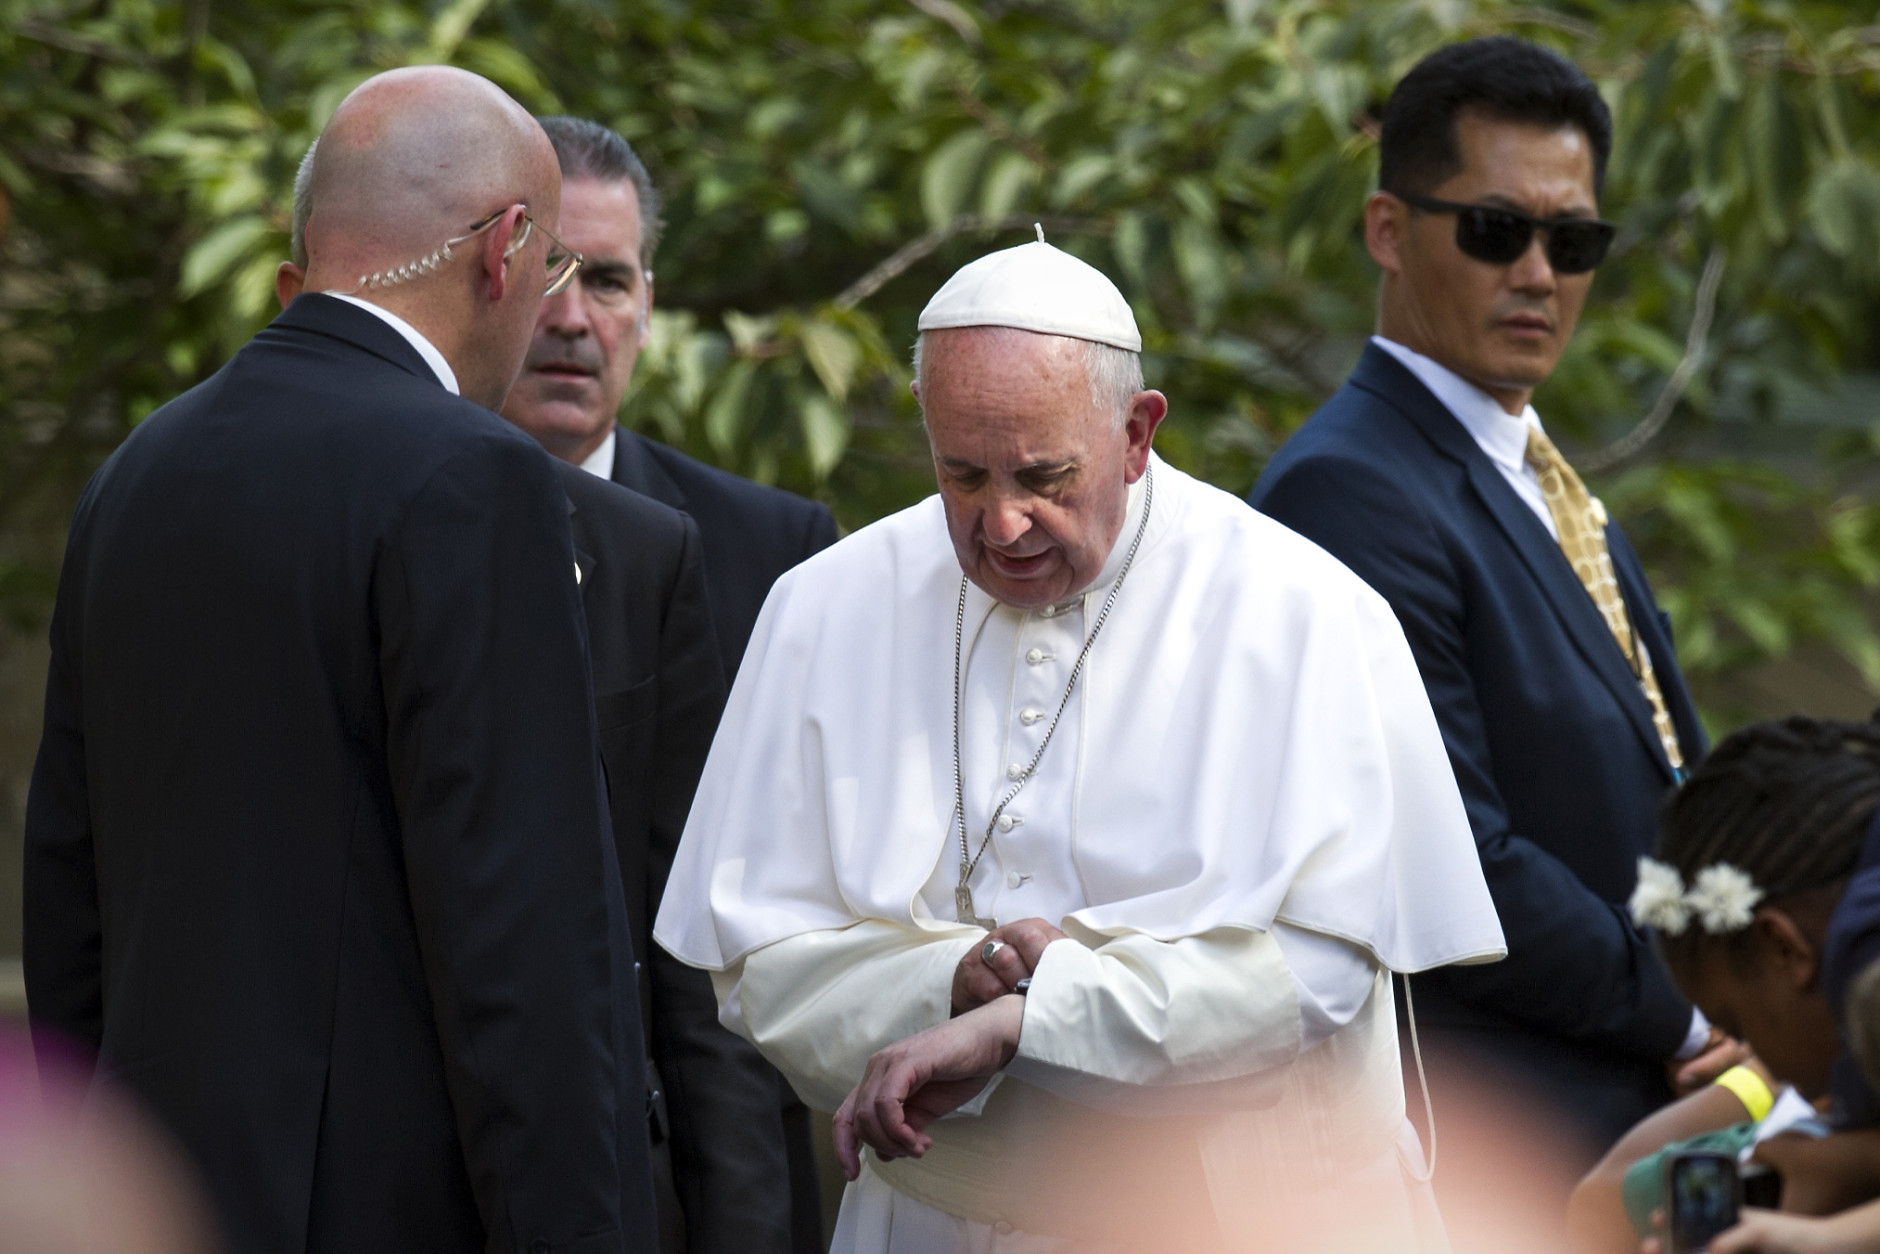 Pope Francis checks his watch as he prepares to depart the Apostolic Nunciature, the Vatican's diplomatic mission in the heart of Washington, en route to Andrews Air Force Base, Thursday, Sept. 24, 2015. The Pope's next stop is New York before heading to Philadelphia.  (AP Photo/Cliff Owen)